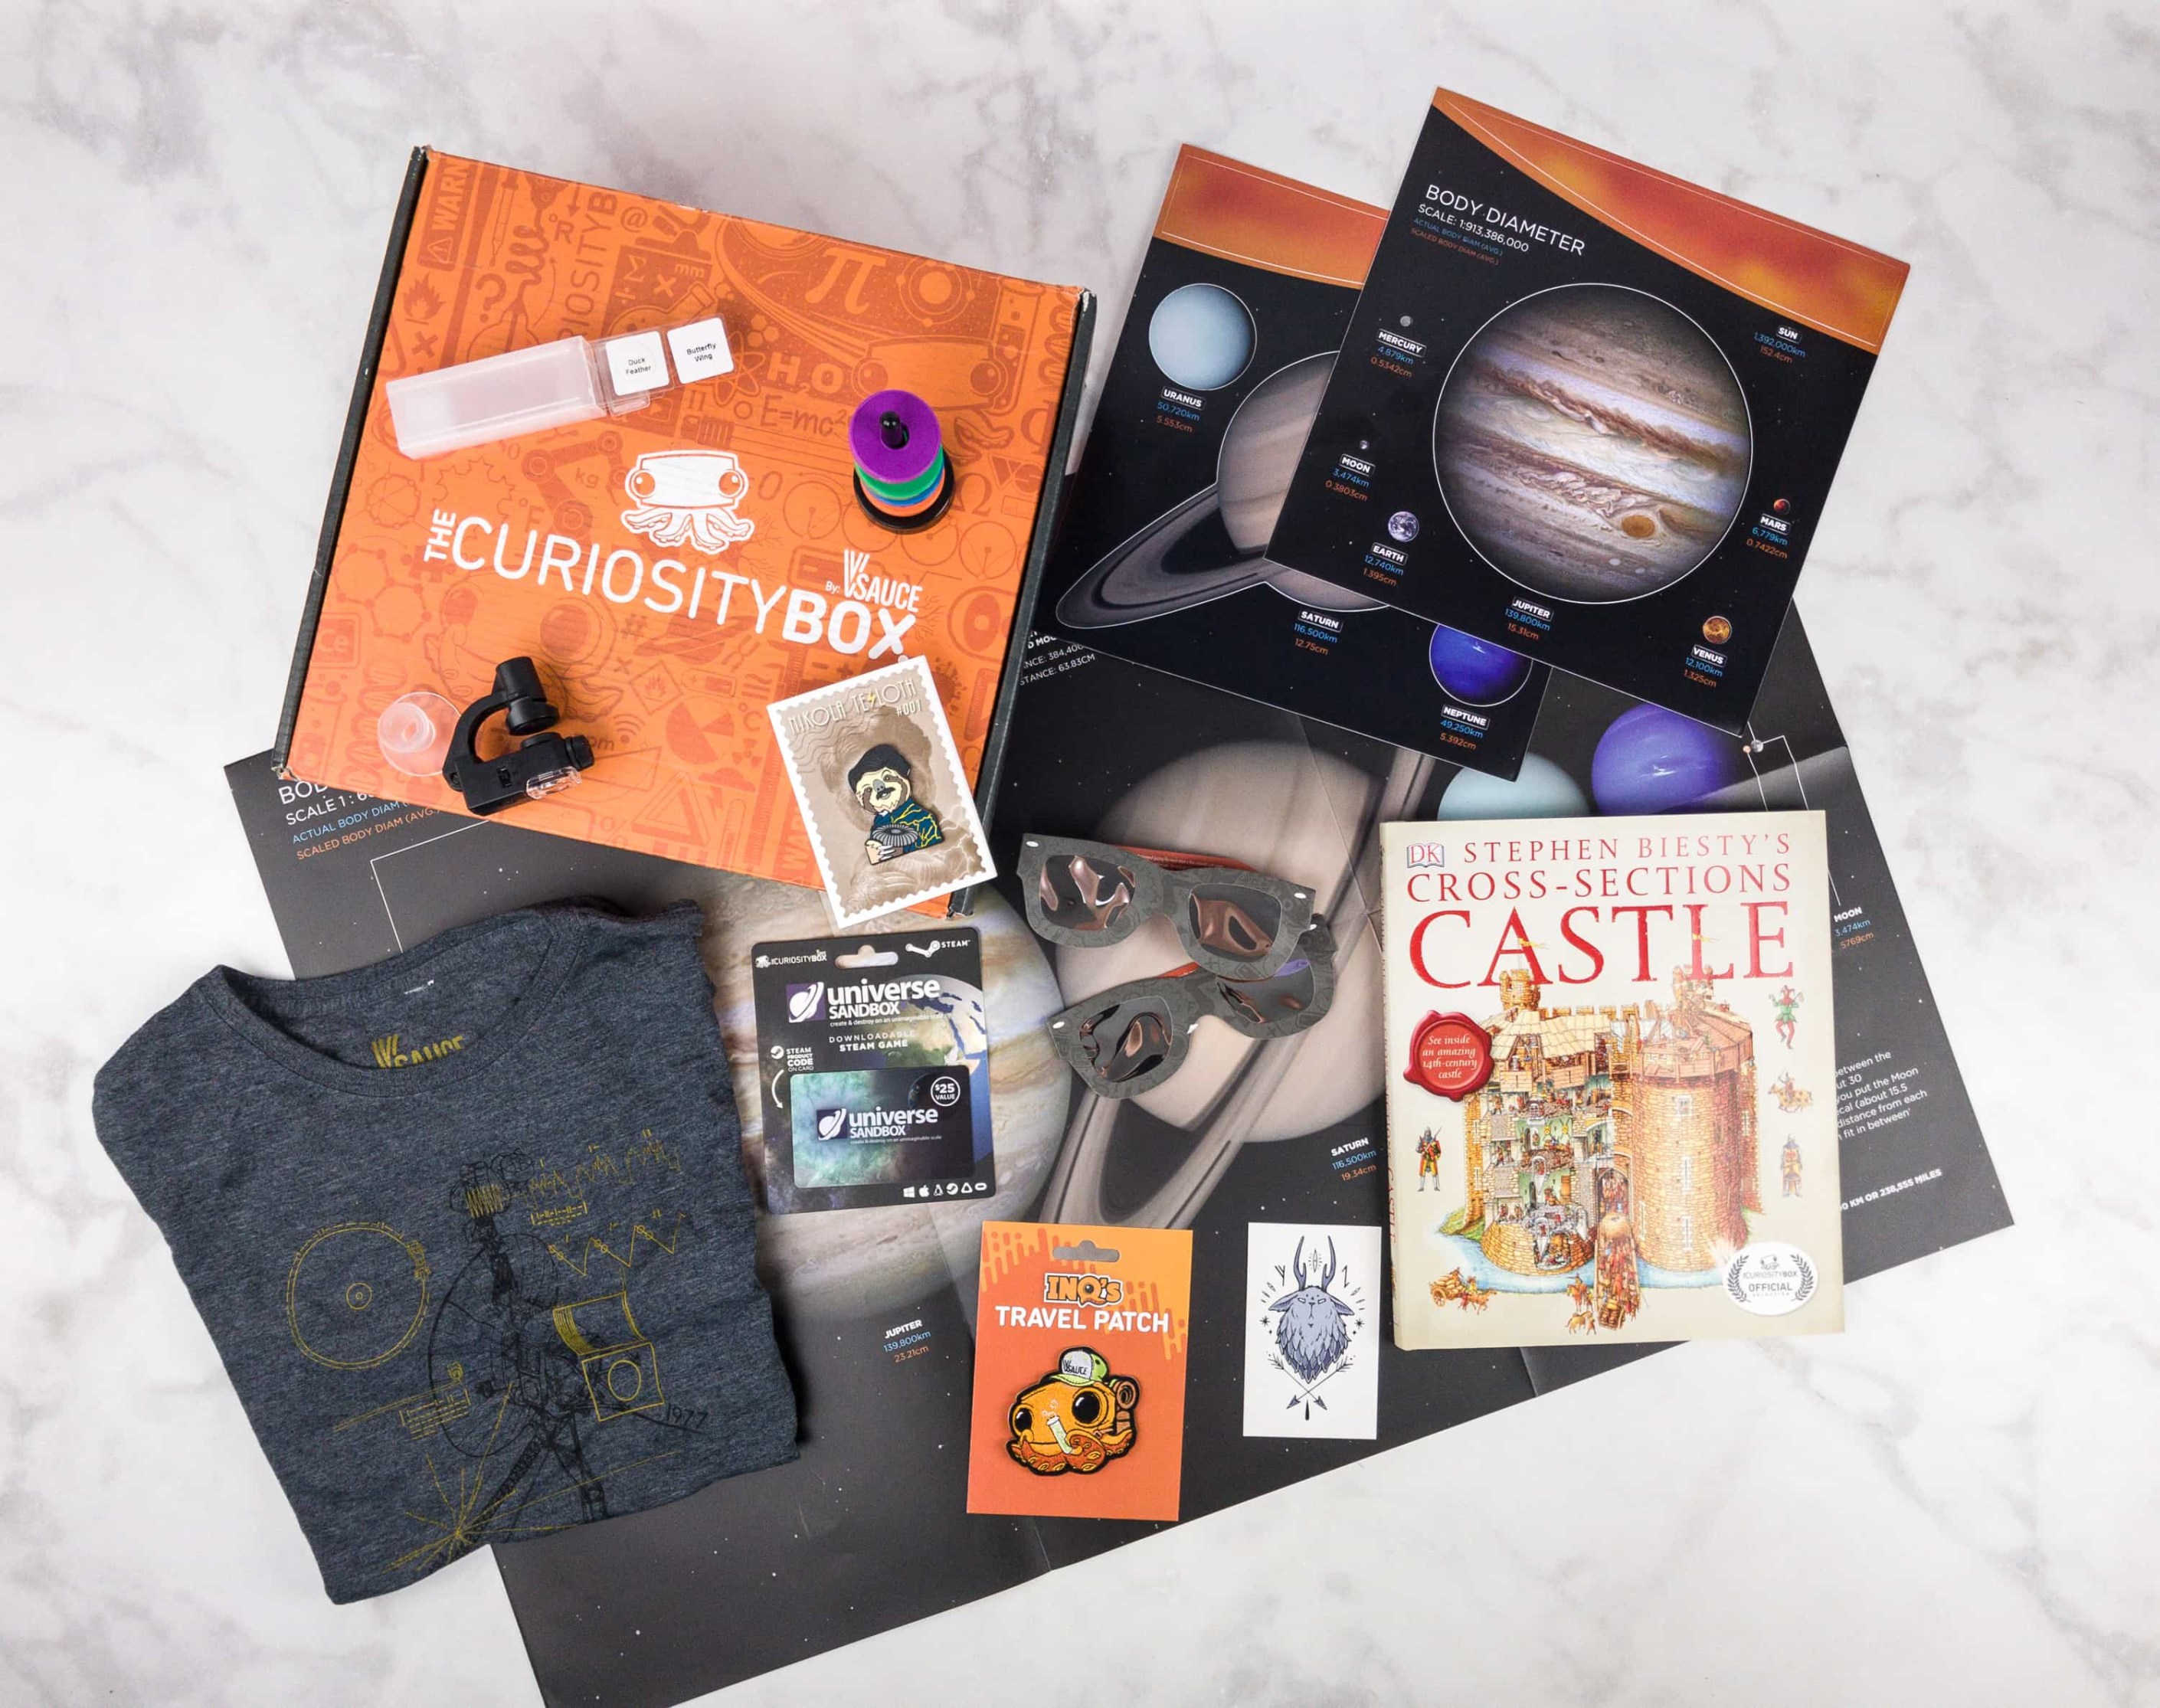 The Curiosity Box Reviews Get All The Details At Hello Subscription!